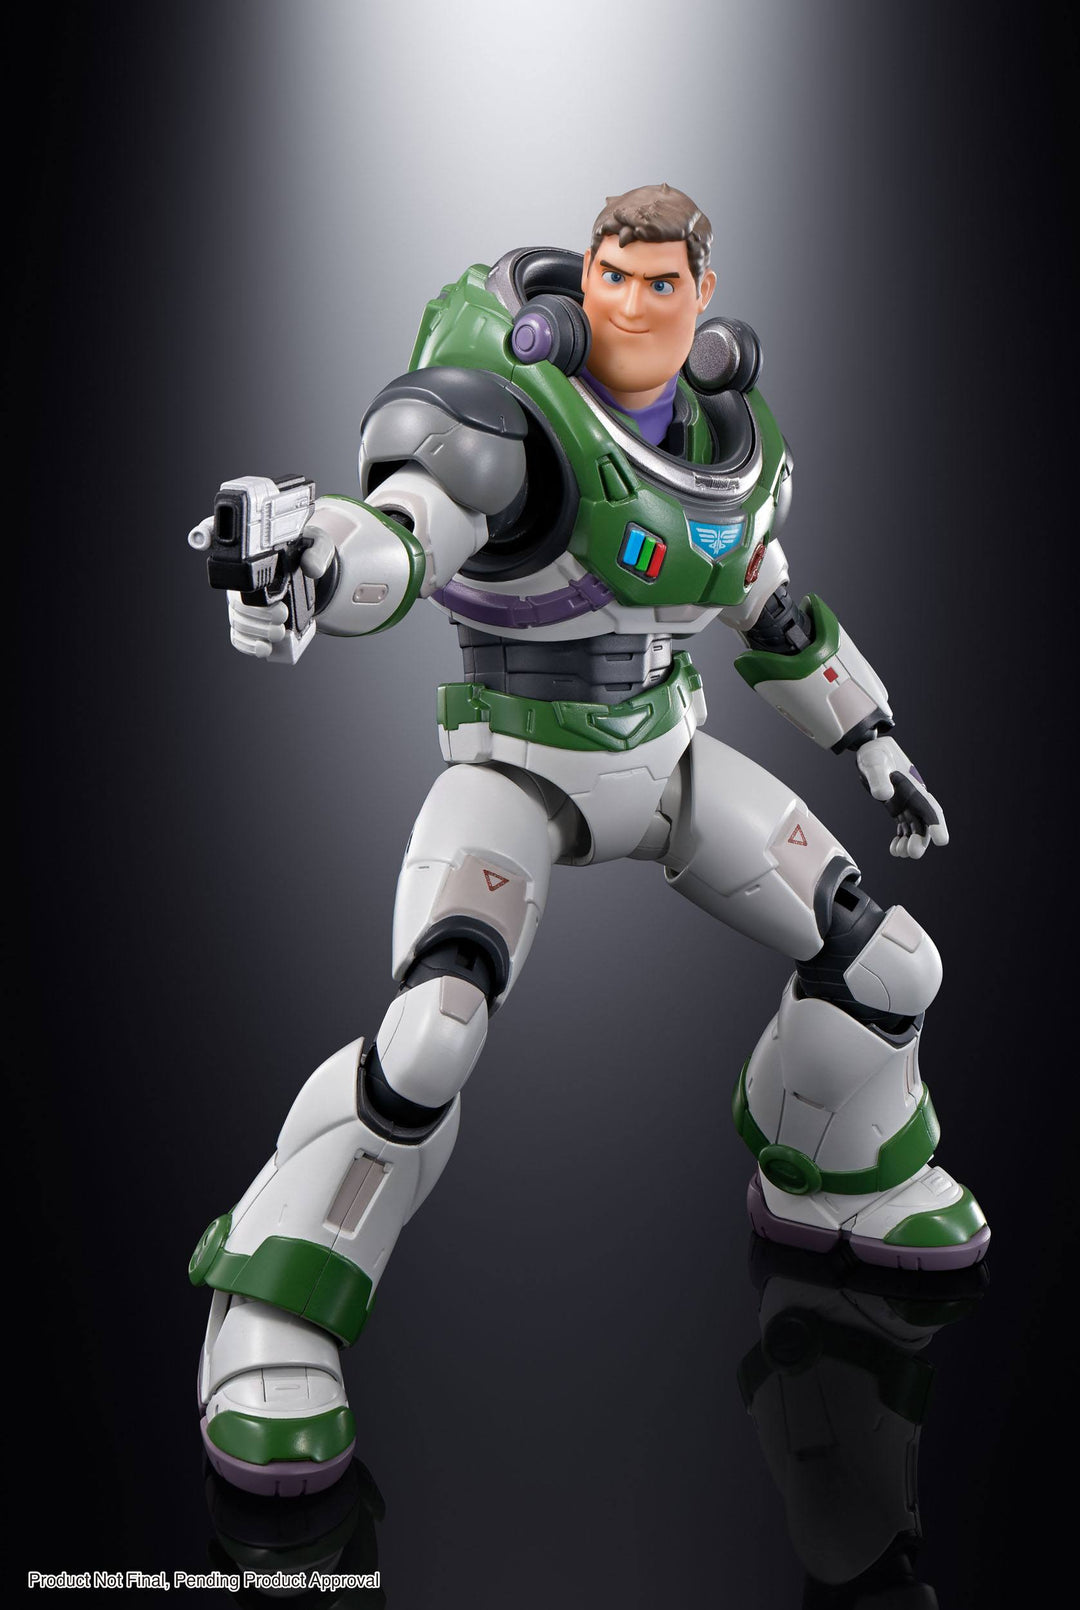 Lightyear S.H. Figuarts Action Figure Buzz Lightyear Alpha Suit - Infinity Collectables 